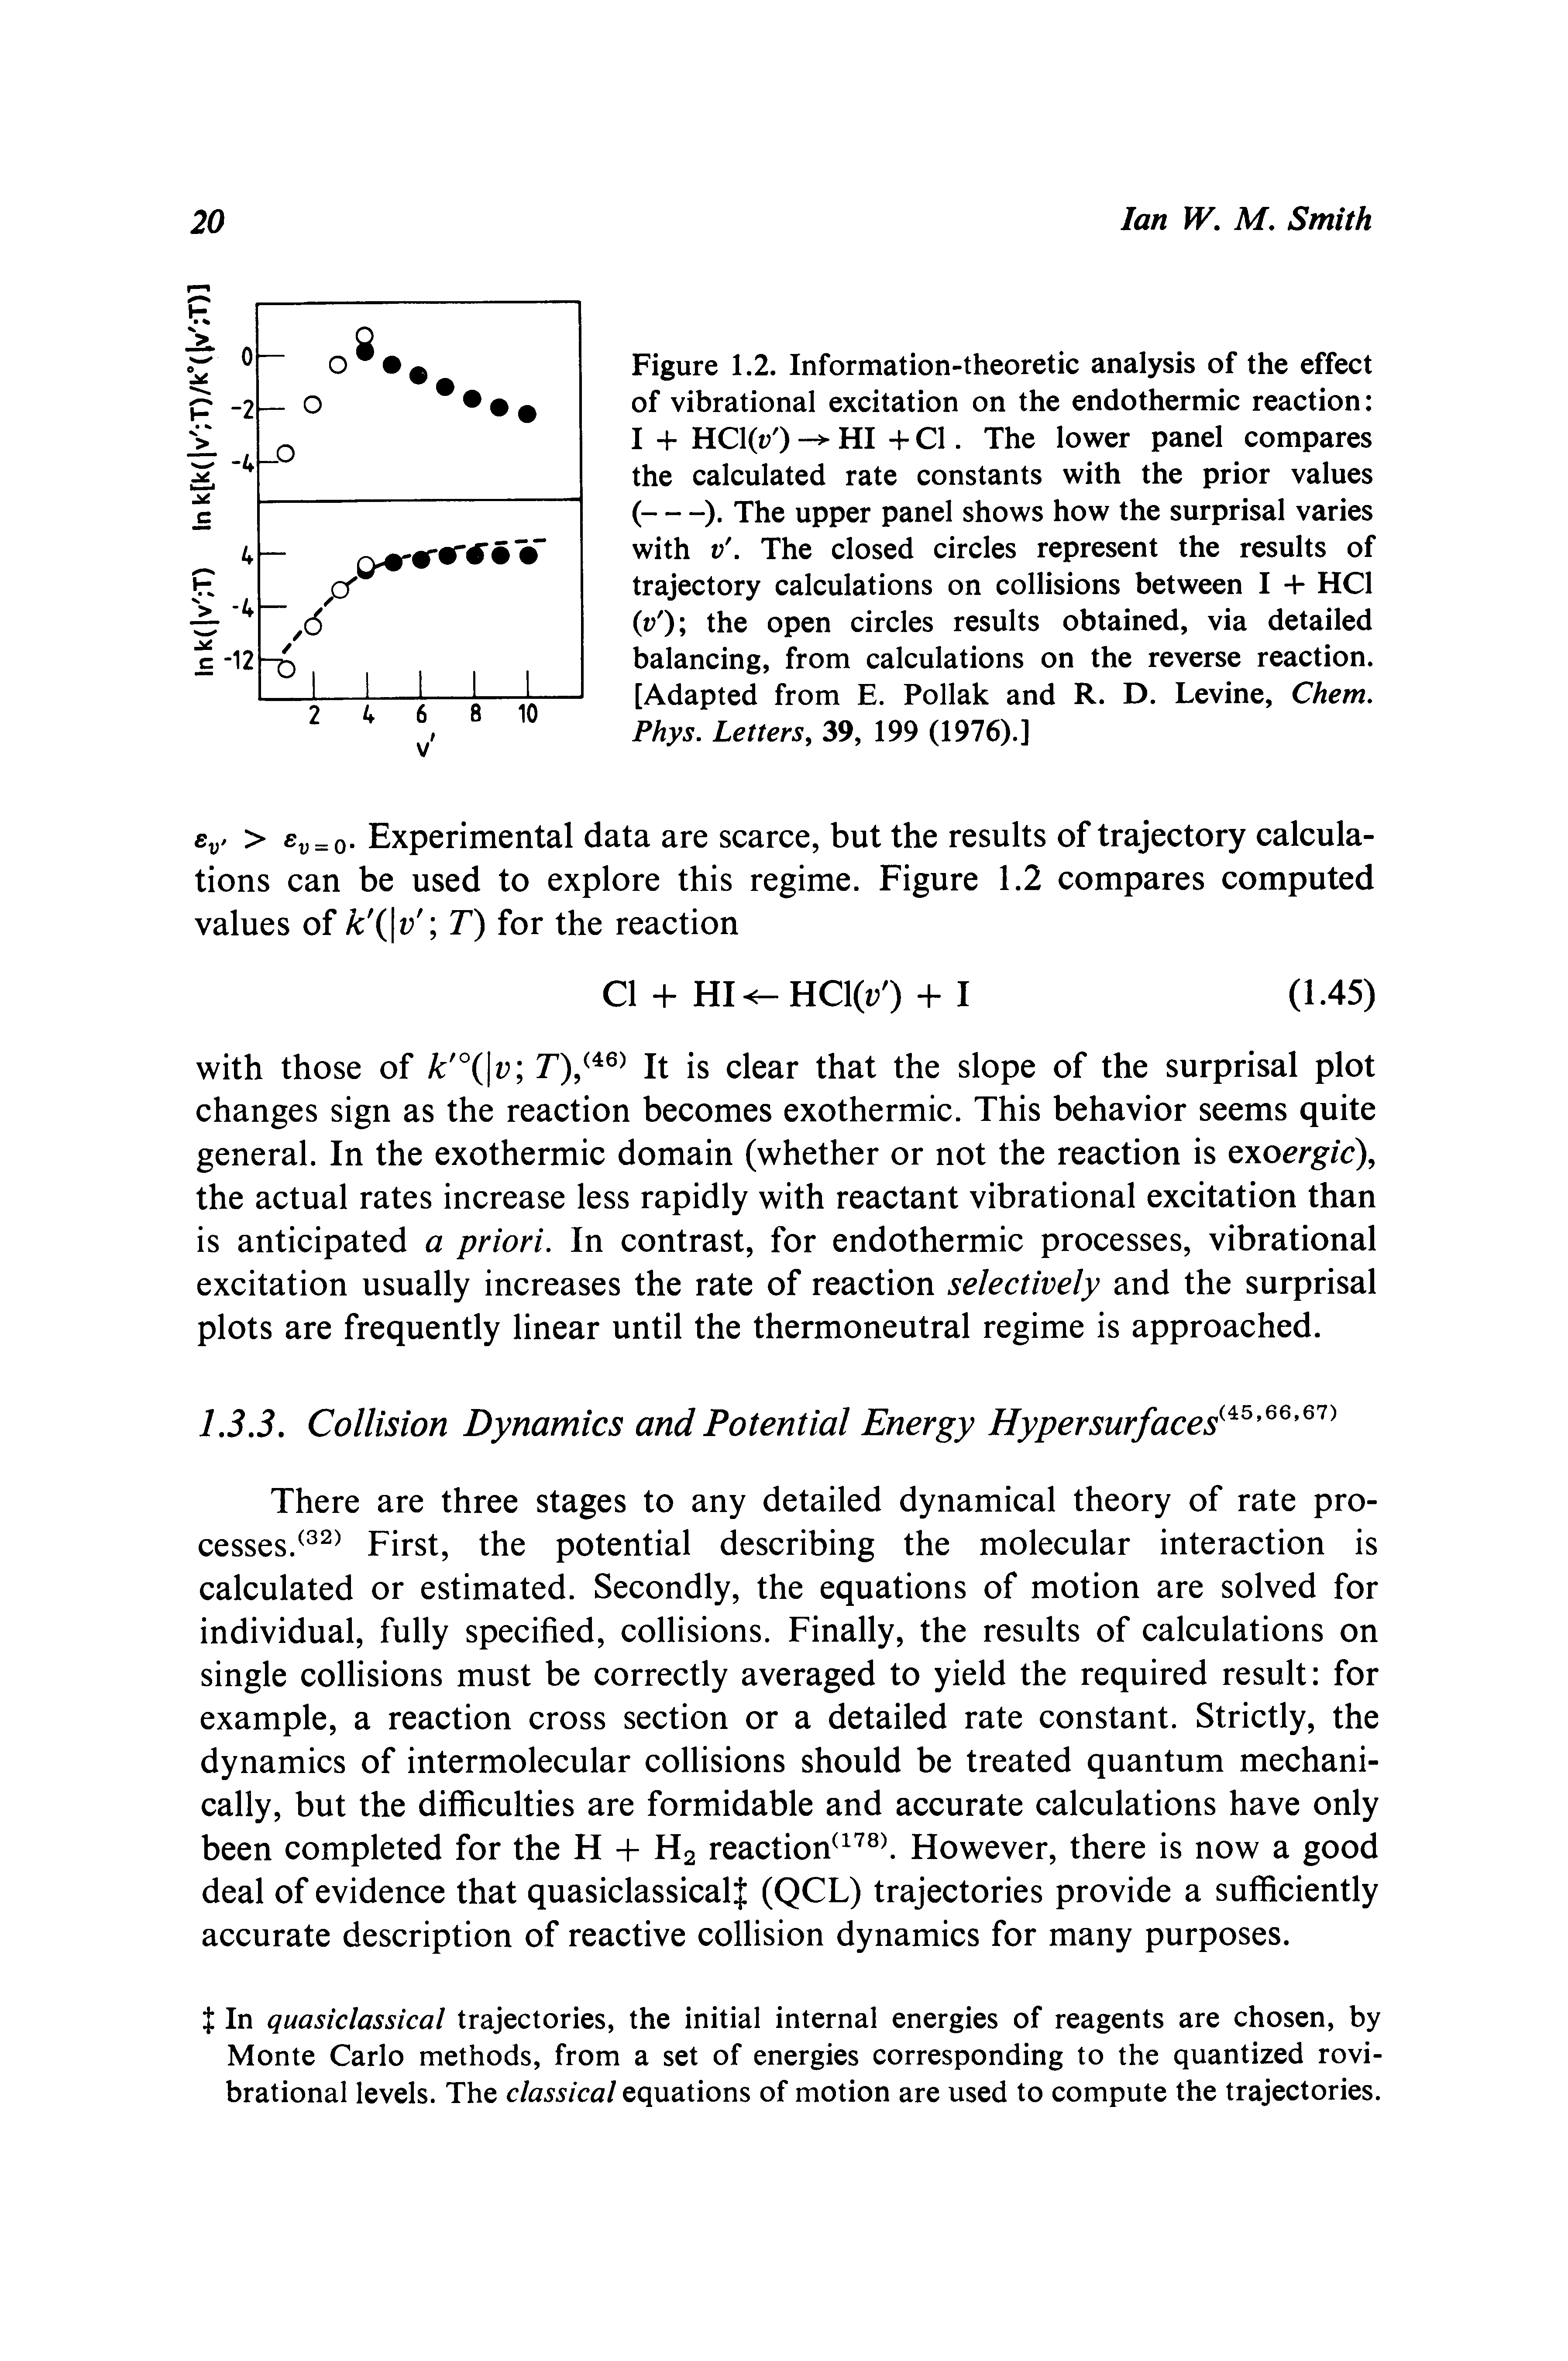 Figure 1.2. Information-theoretic analysis of the effect of vibrational excitation on the endothermic reaction I + HCI(t 0 -> HI + Cl. The lower panel compares the calculated rate constants with the prior values...